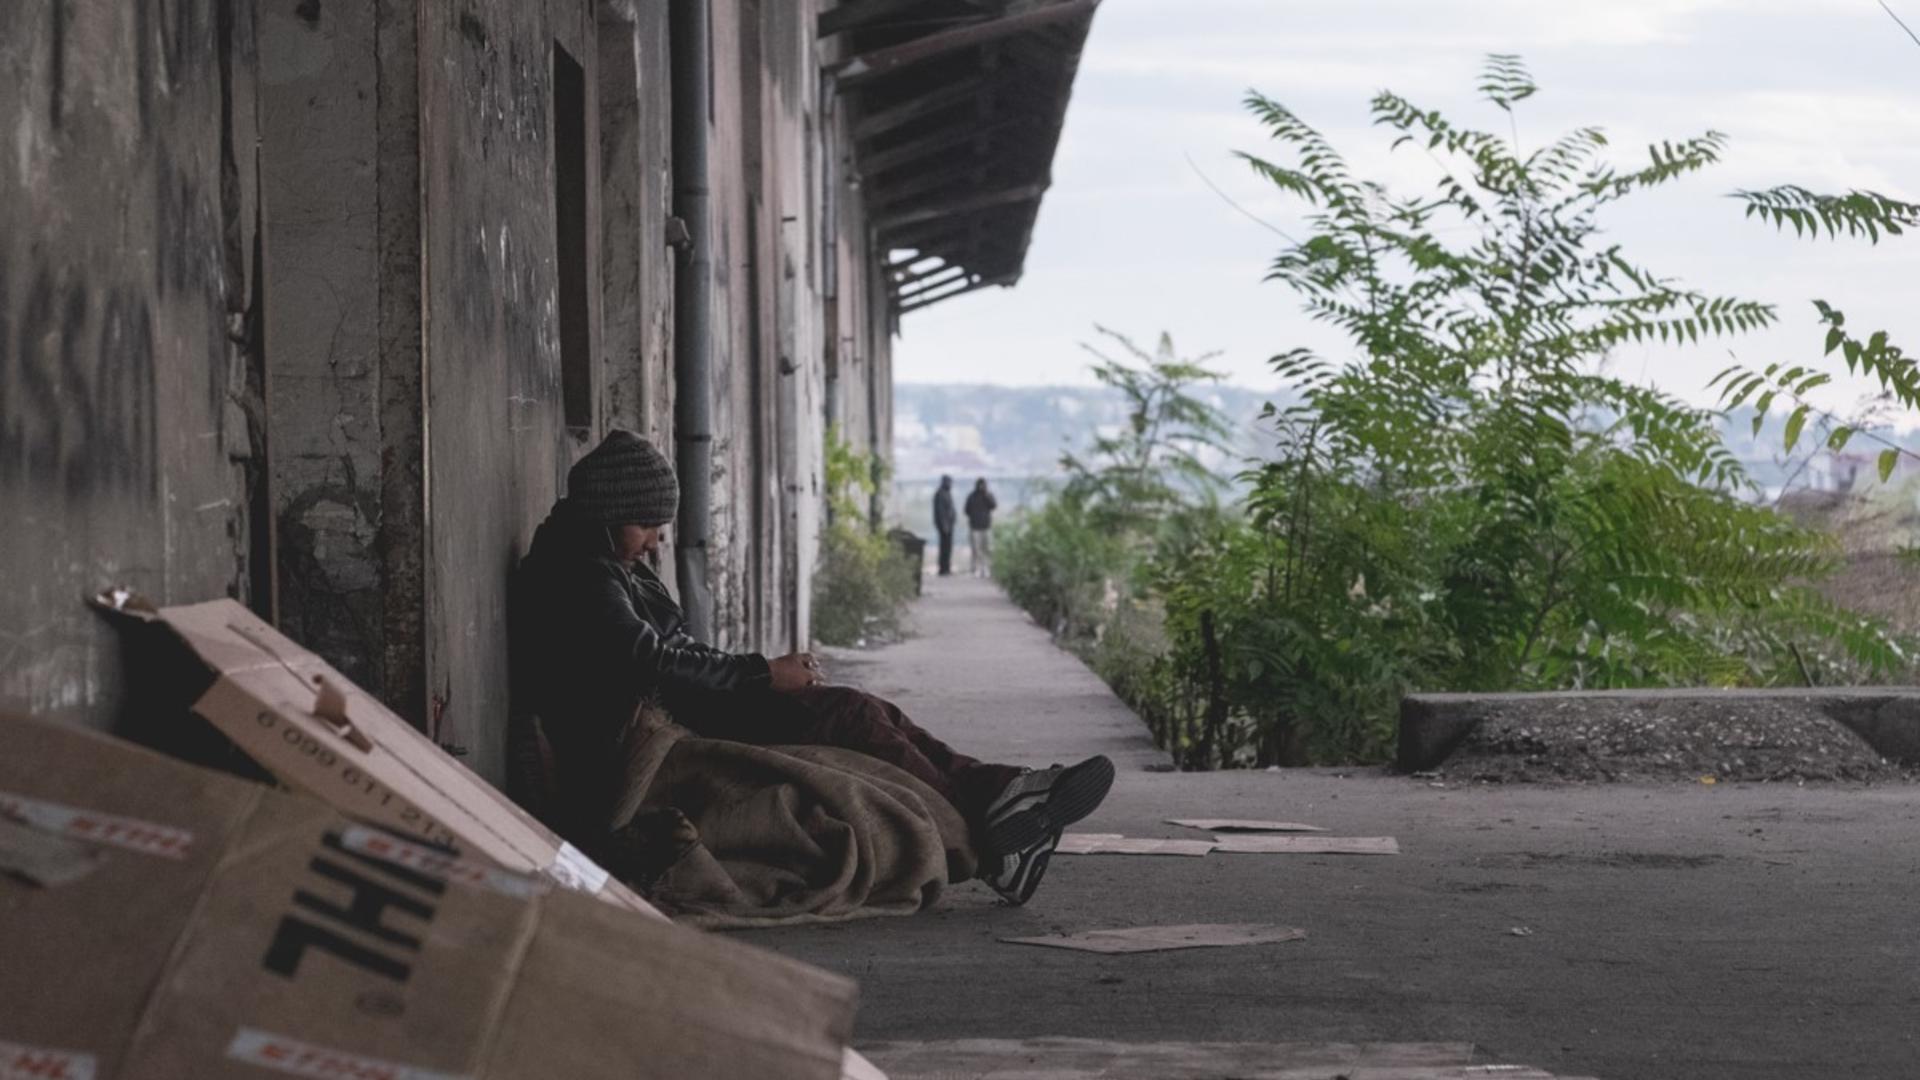 A young Afghan refugee sits huddled outside an abandoned warehouse in Serbia.